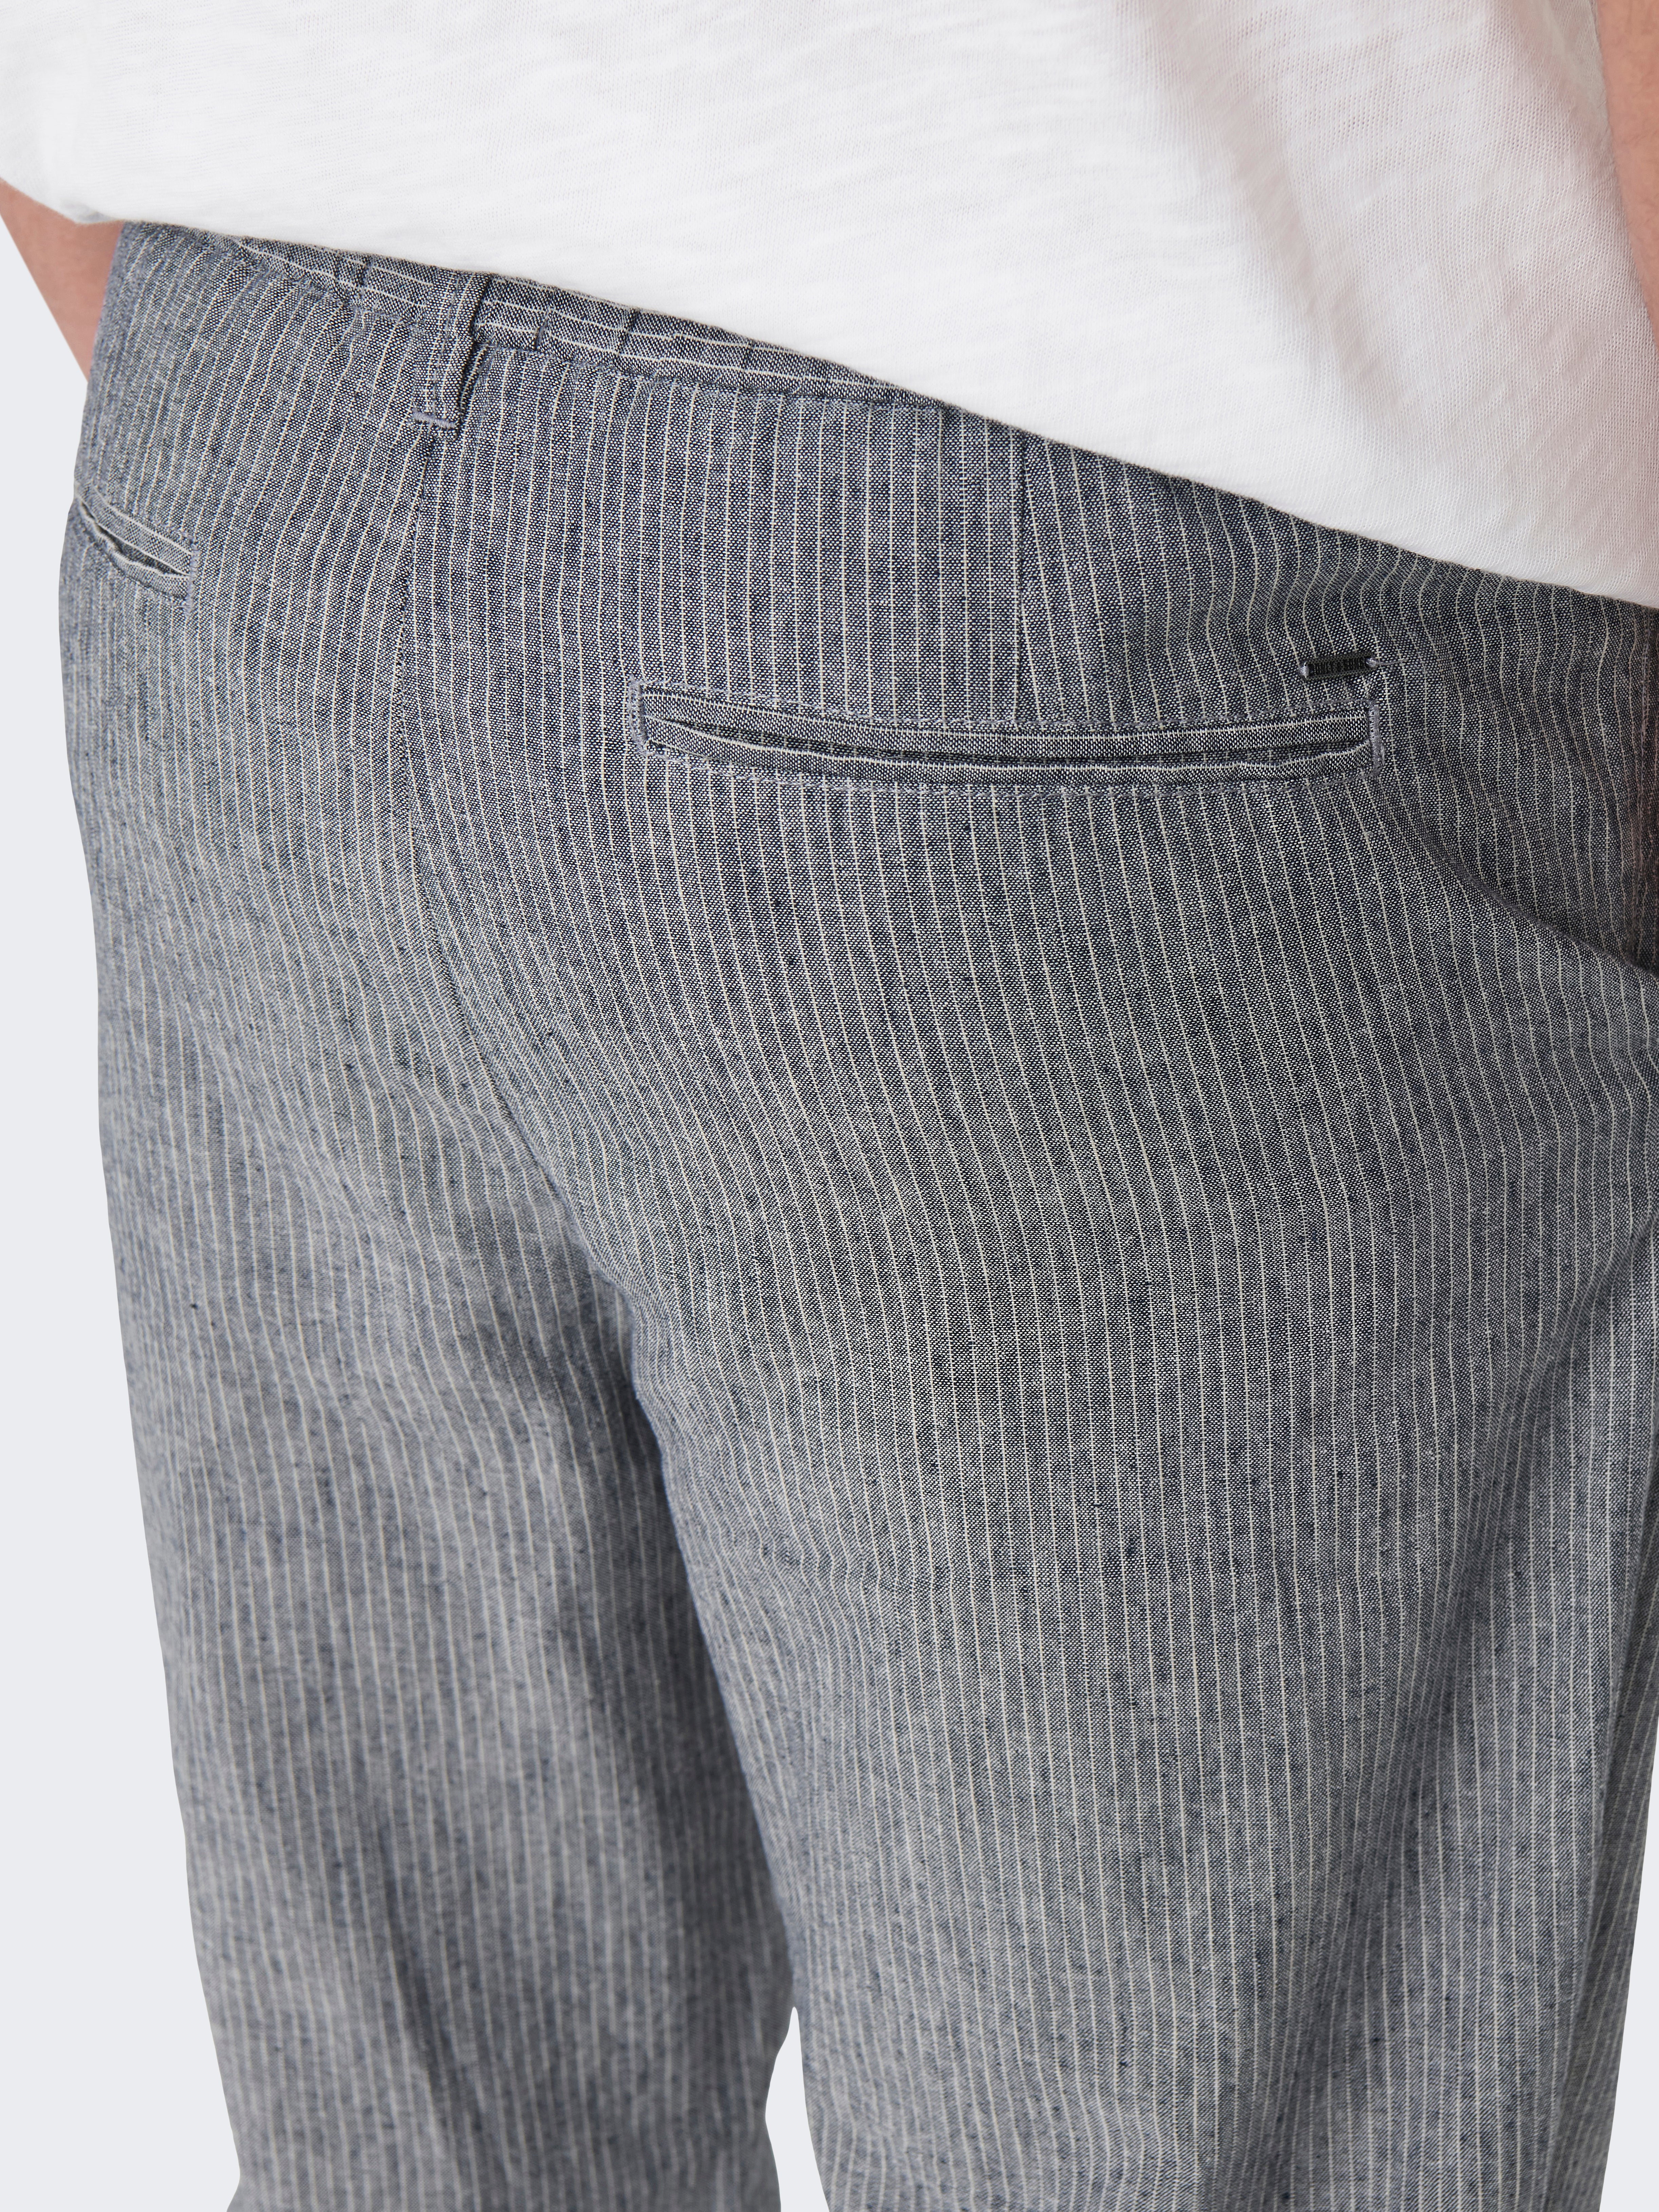 Only  Sons slim tapered smart trousers in navy check  ASOS